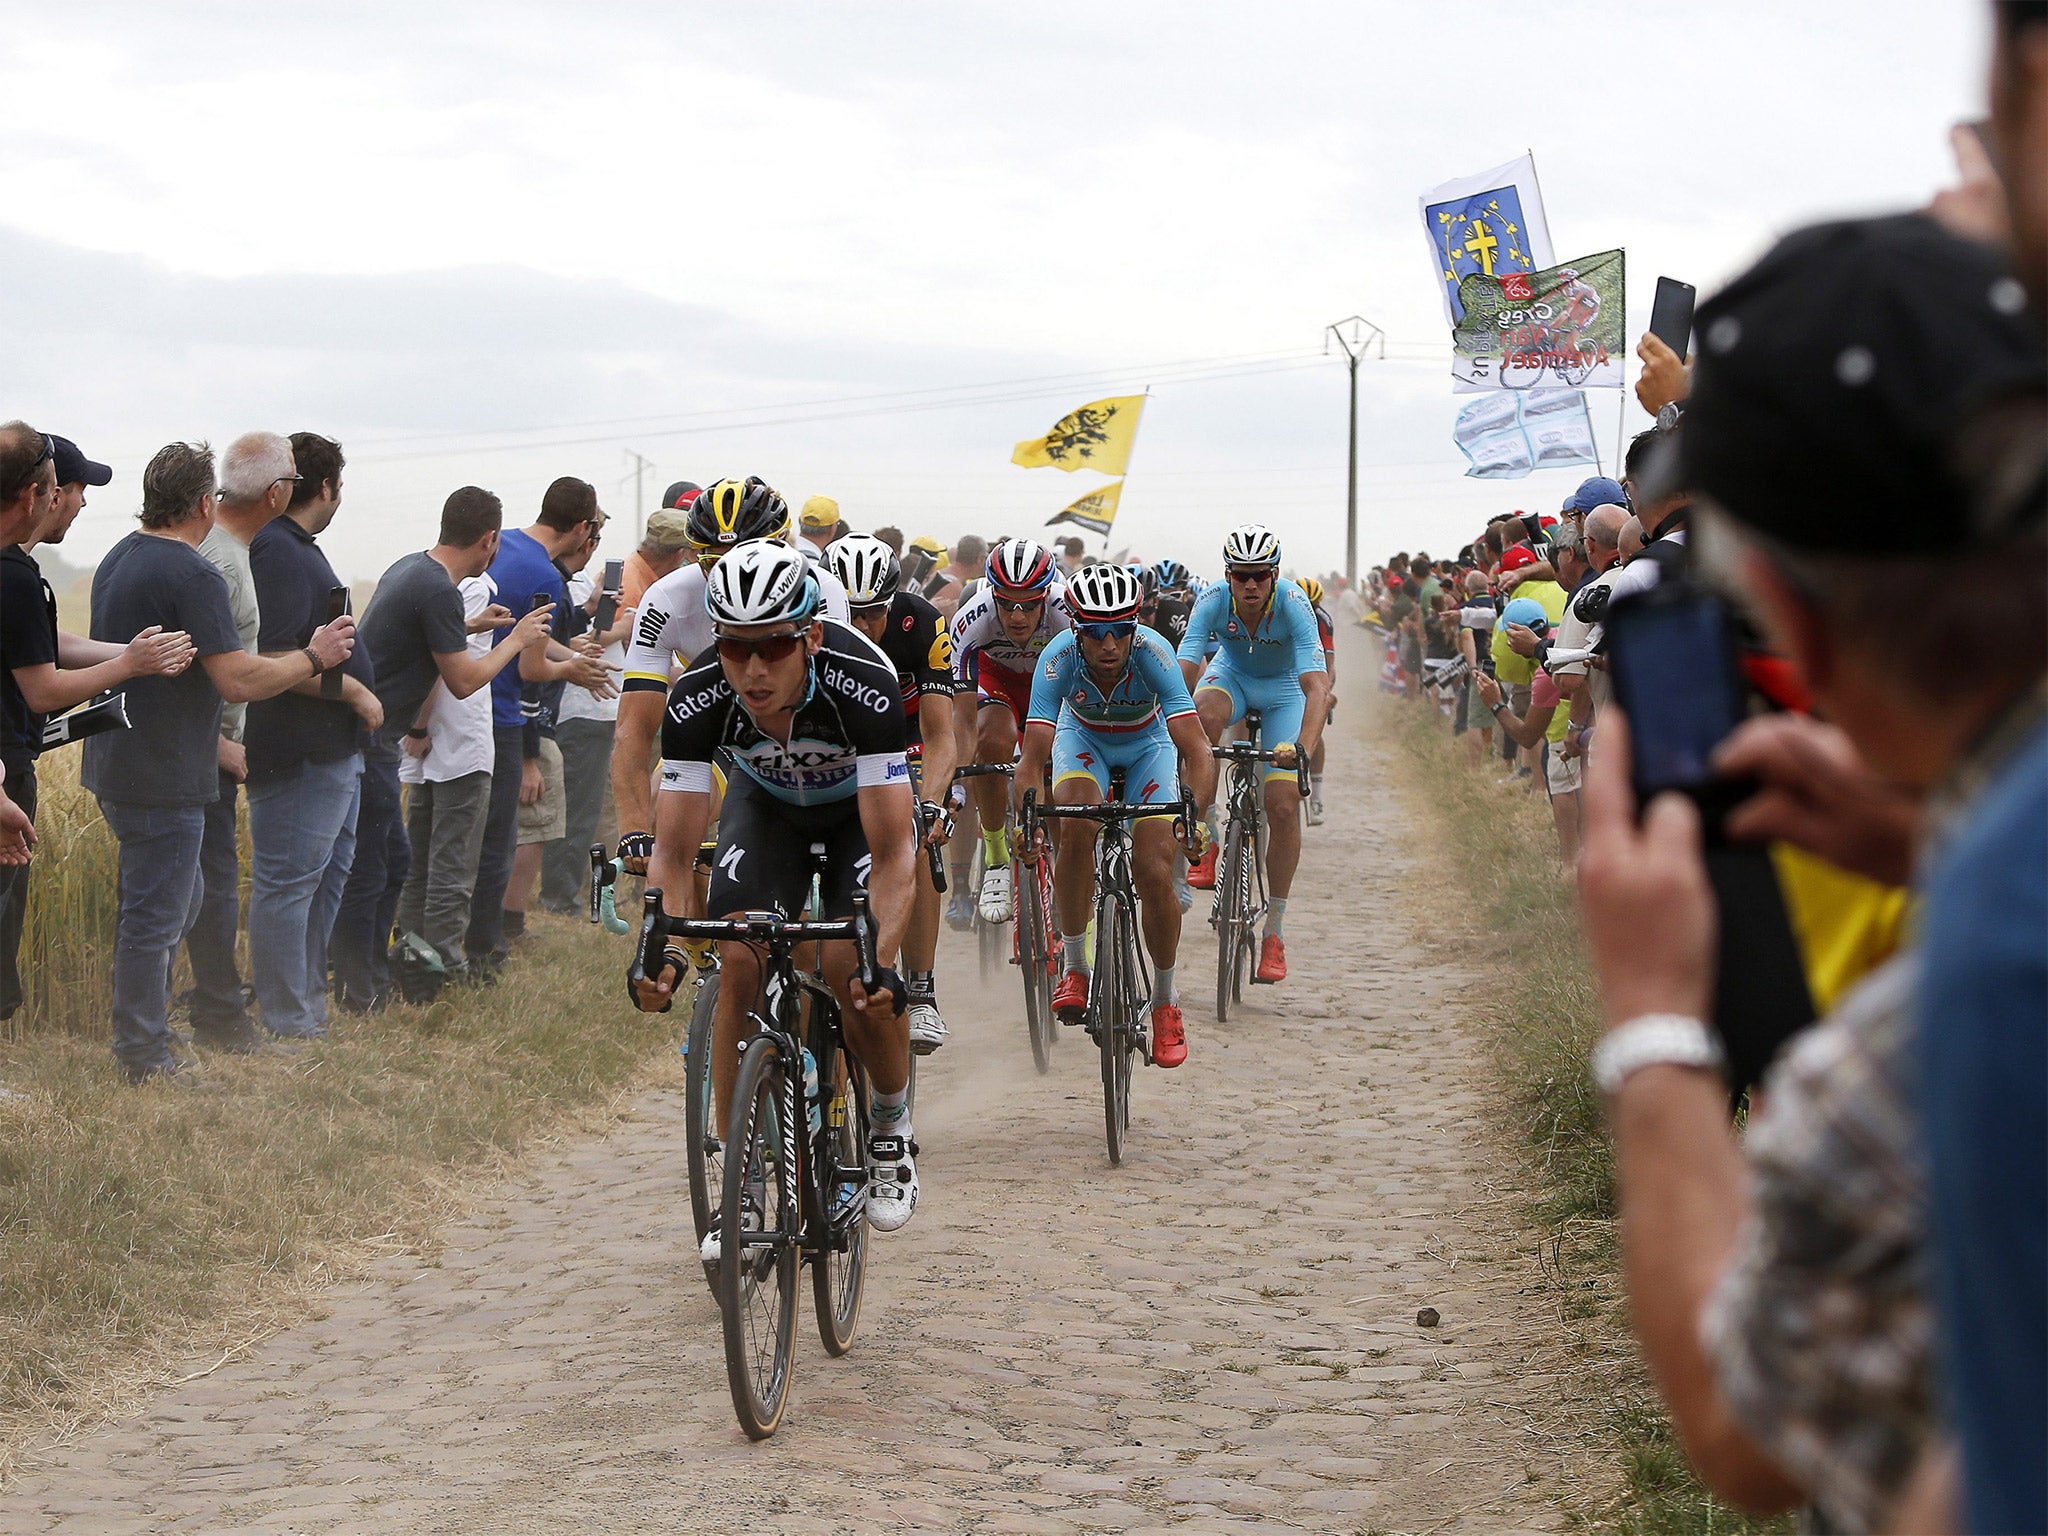 Tony Martin leads on the cobbled stones on his way to victory and the yellow jersey in Tuesday’s fourth stage of the Tour de France